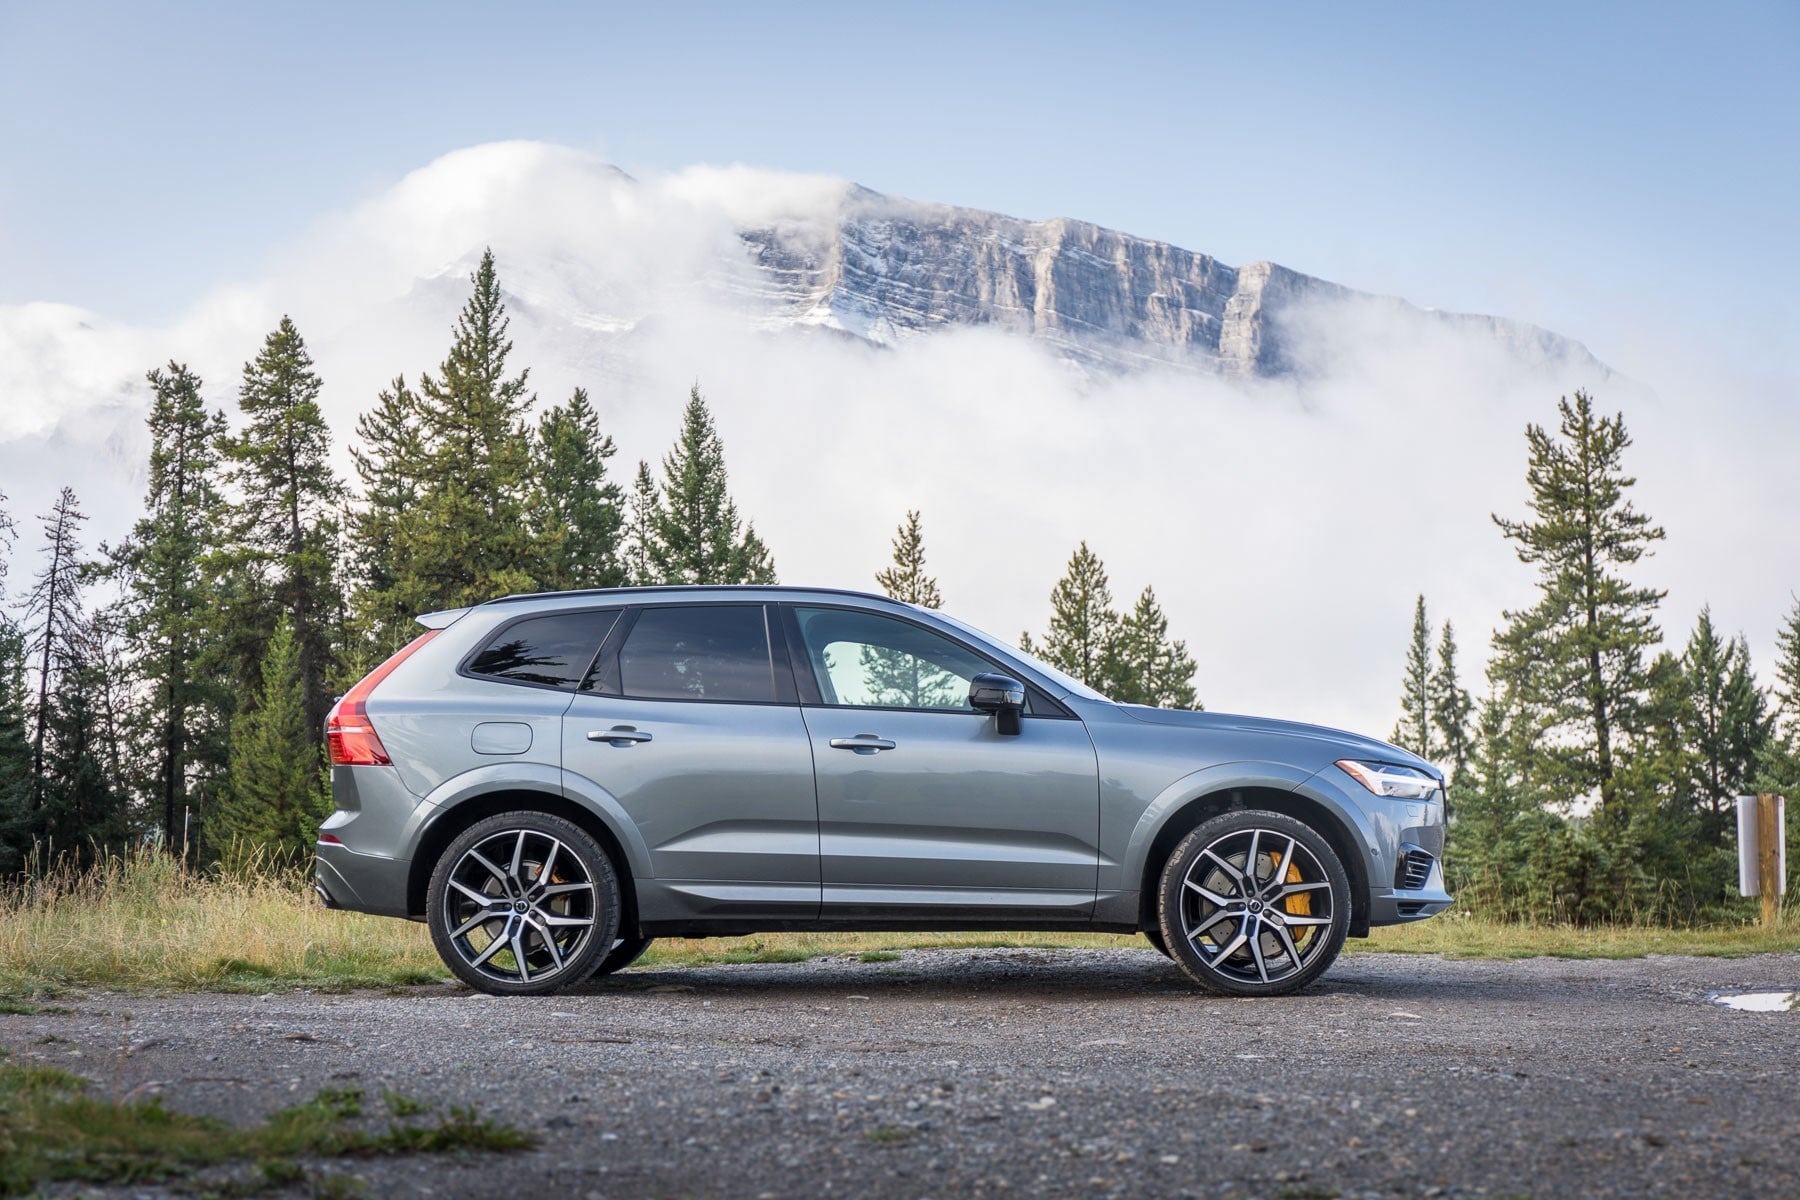 Volvo XC60 Polestar Engineered: Gold, green and go – The North State